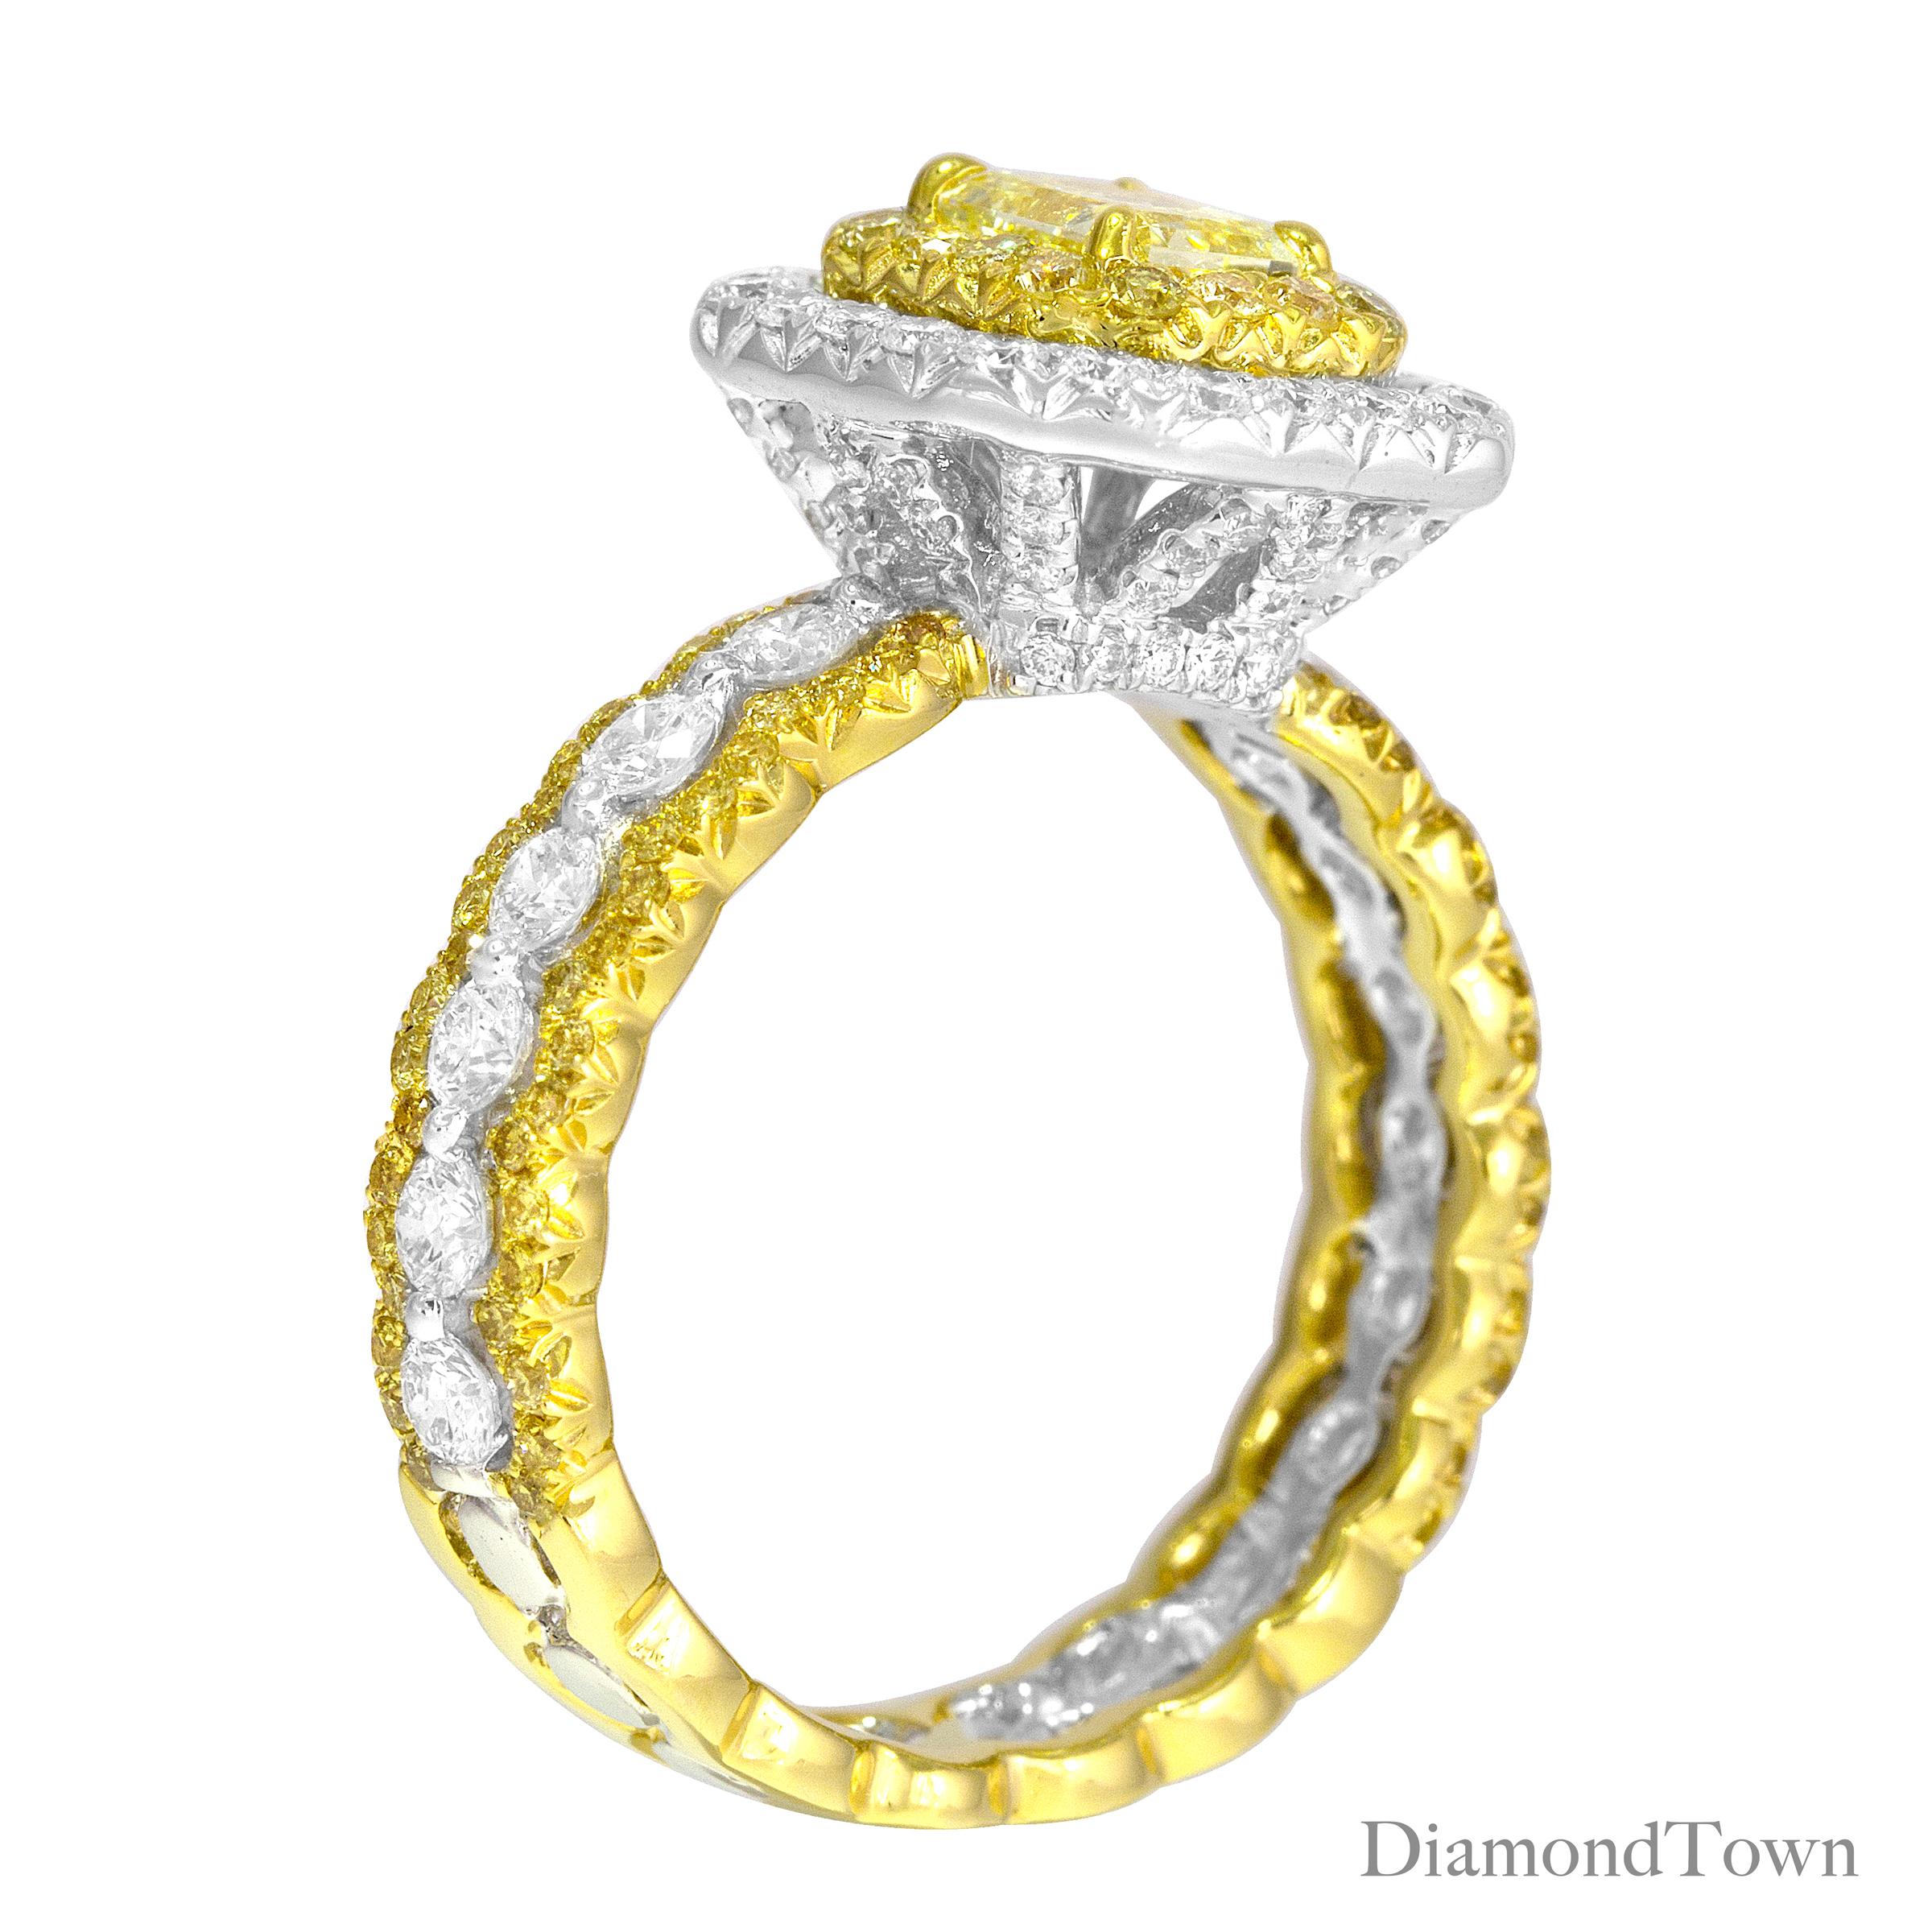 This captivating ring showcases a GIA Certified 0.70 carat Natural Fancy Yellow Radiant Cut diamond at its core, elegantly encircled by a double halo composed of round yellow and round white diamonds. The entire piece is skillfully crafted in 18k